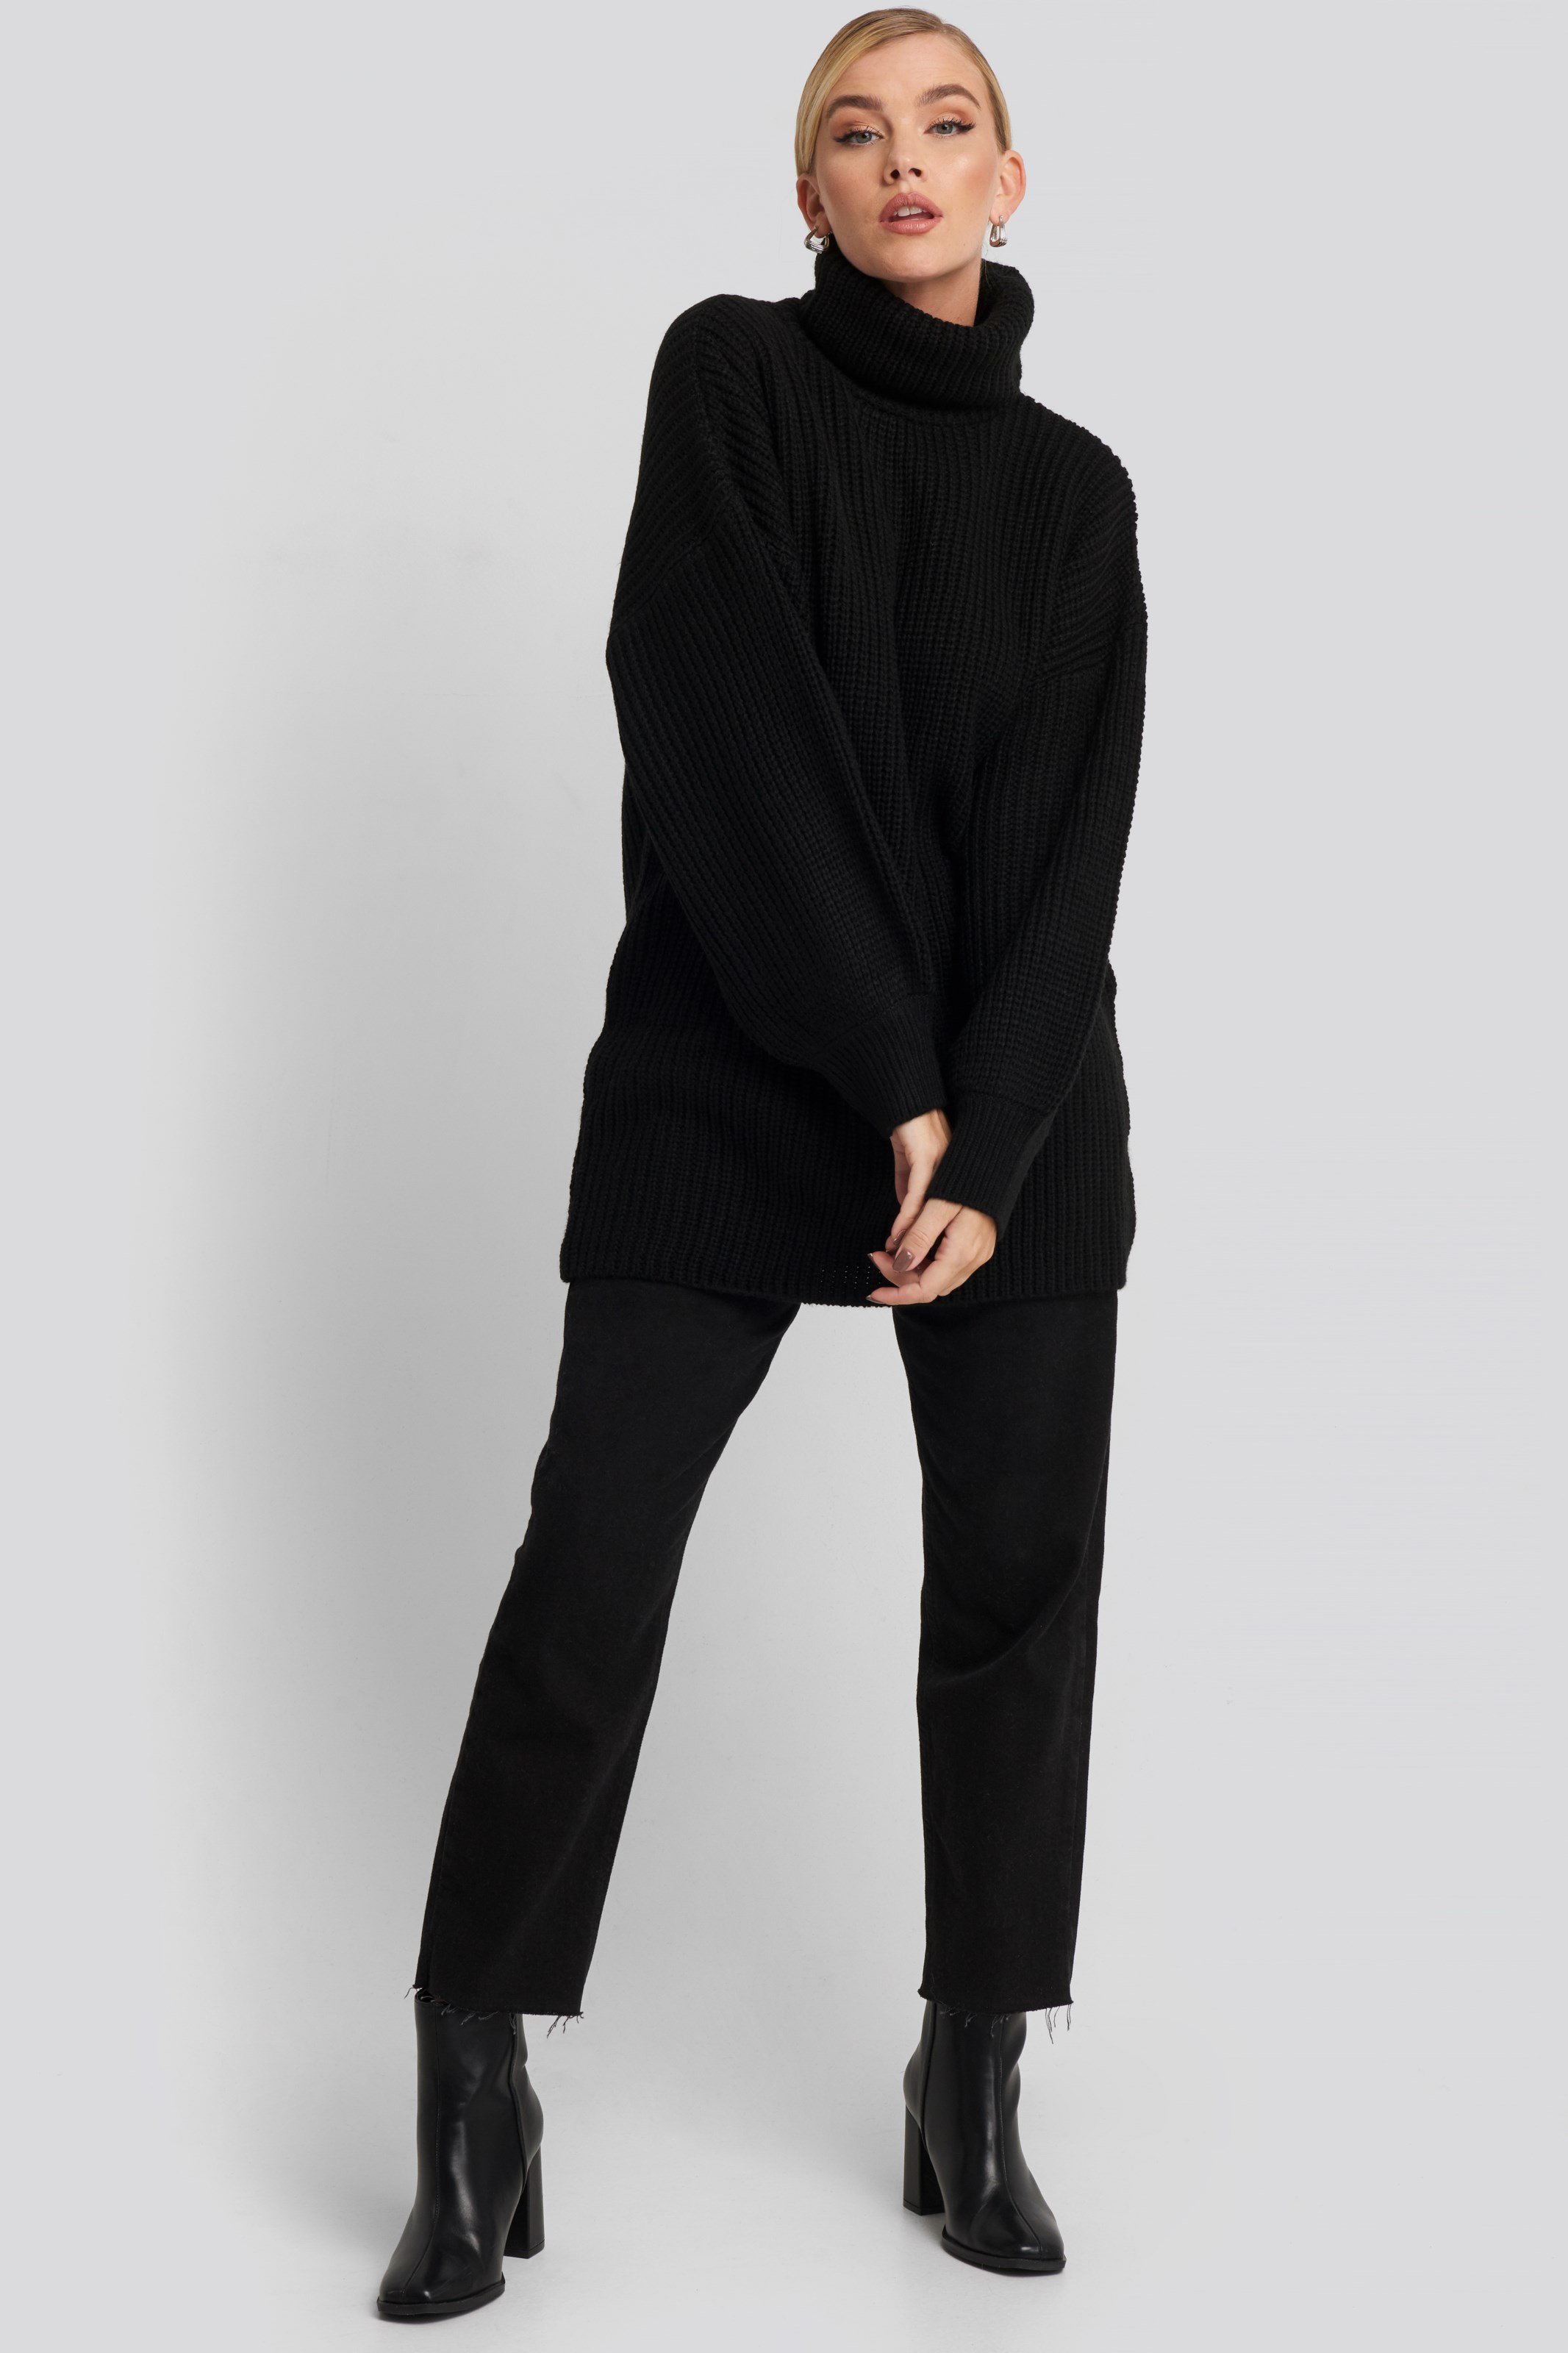 Oversized High Neck Long Knitted sweater Black Outfit.